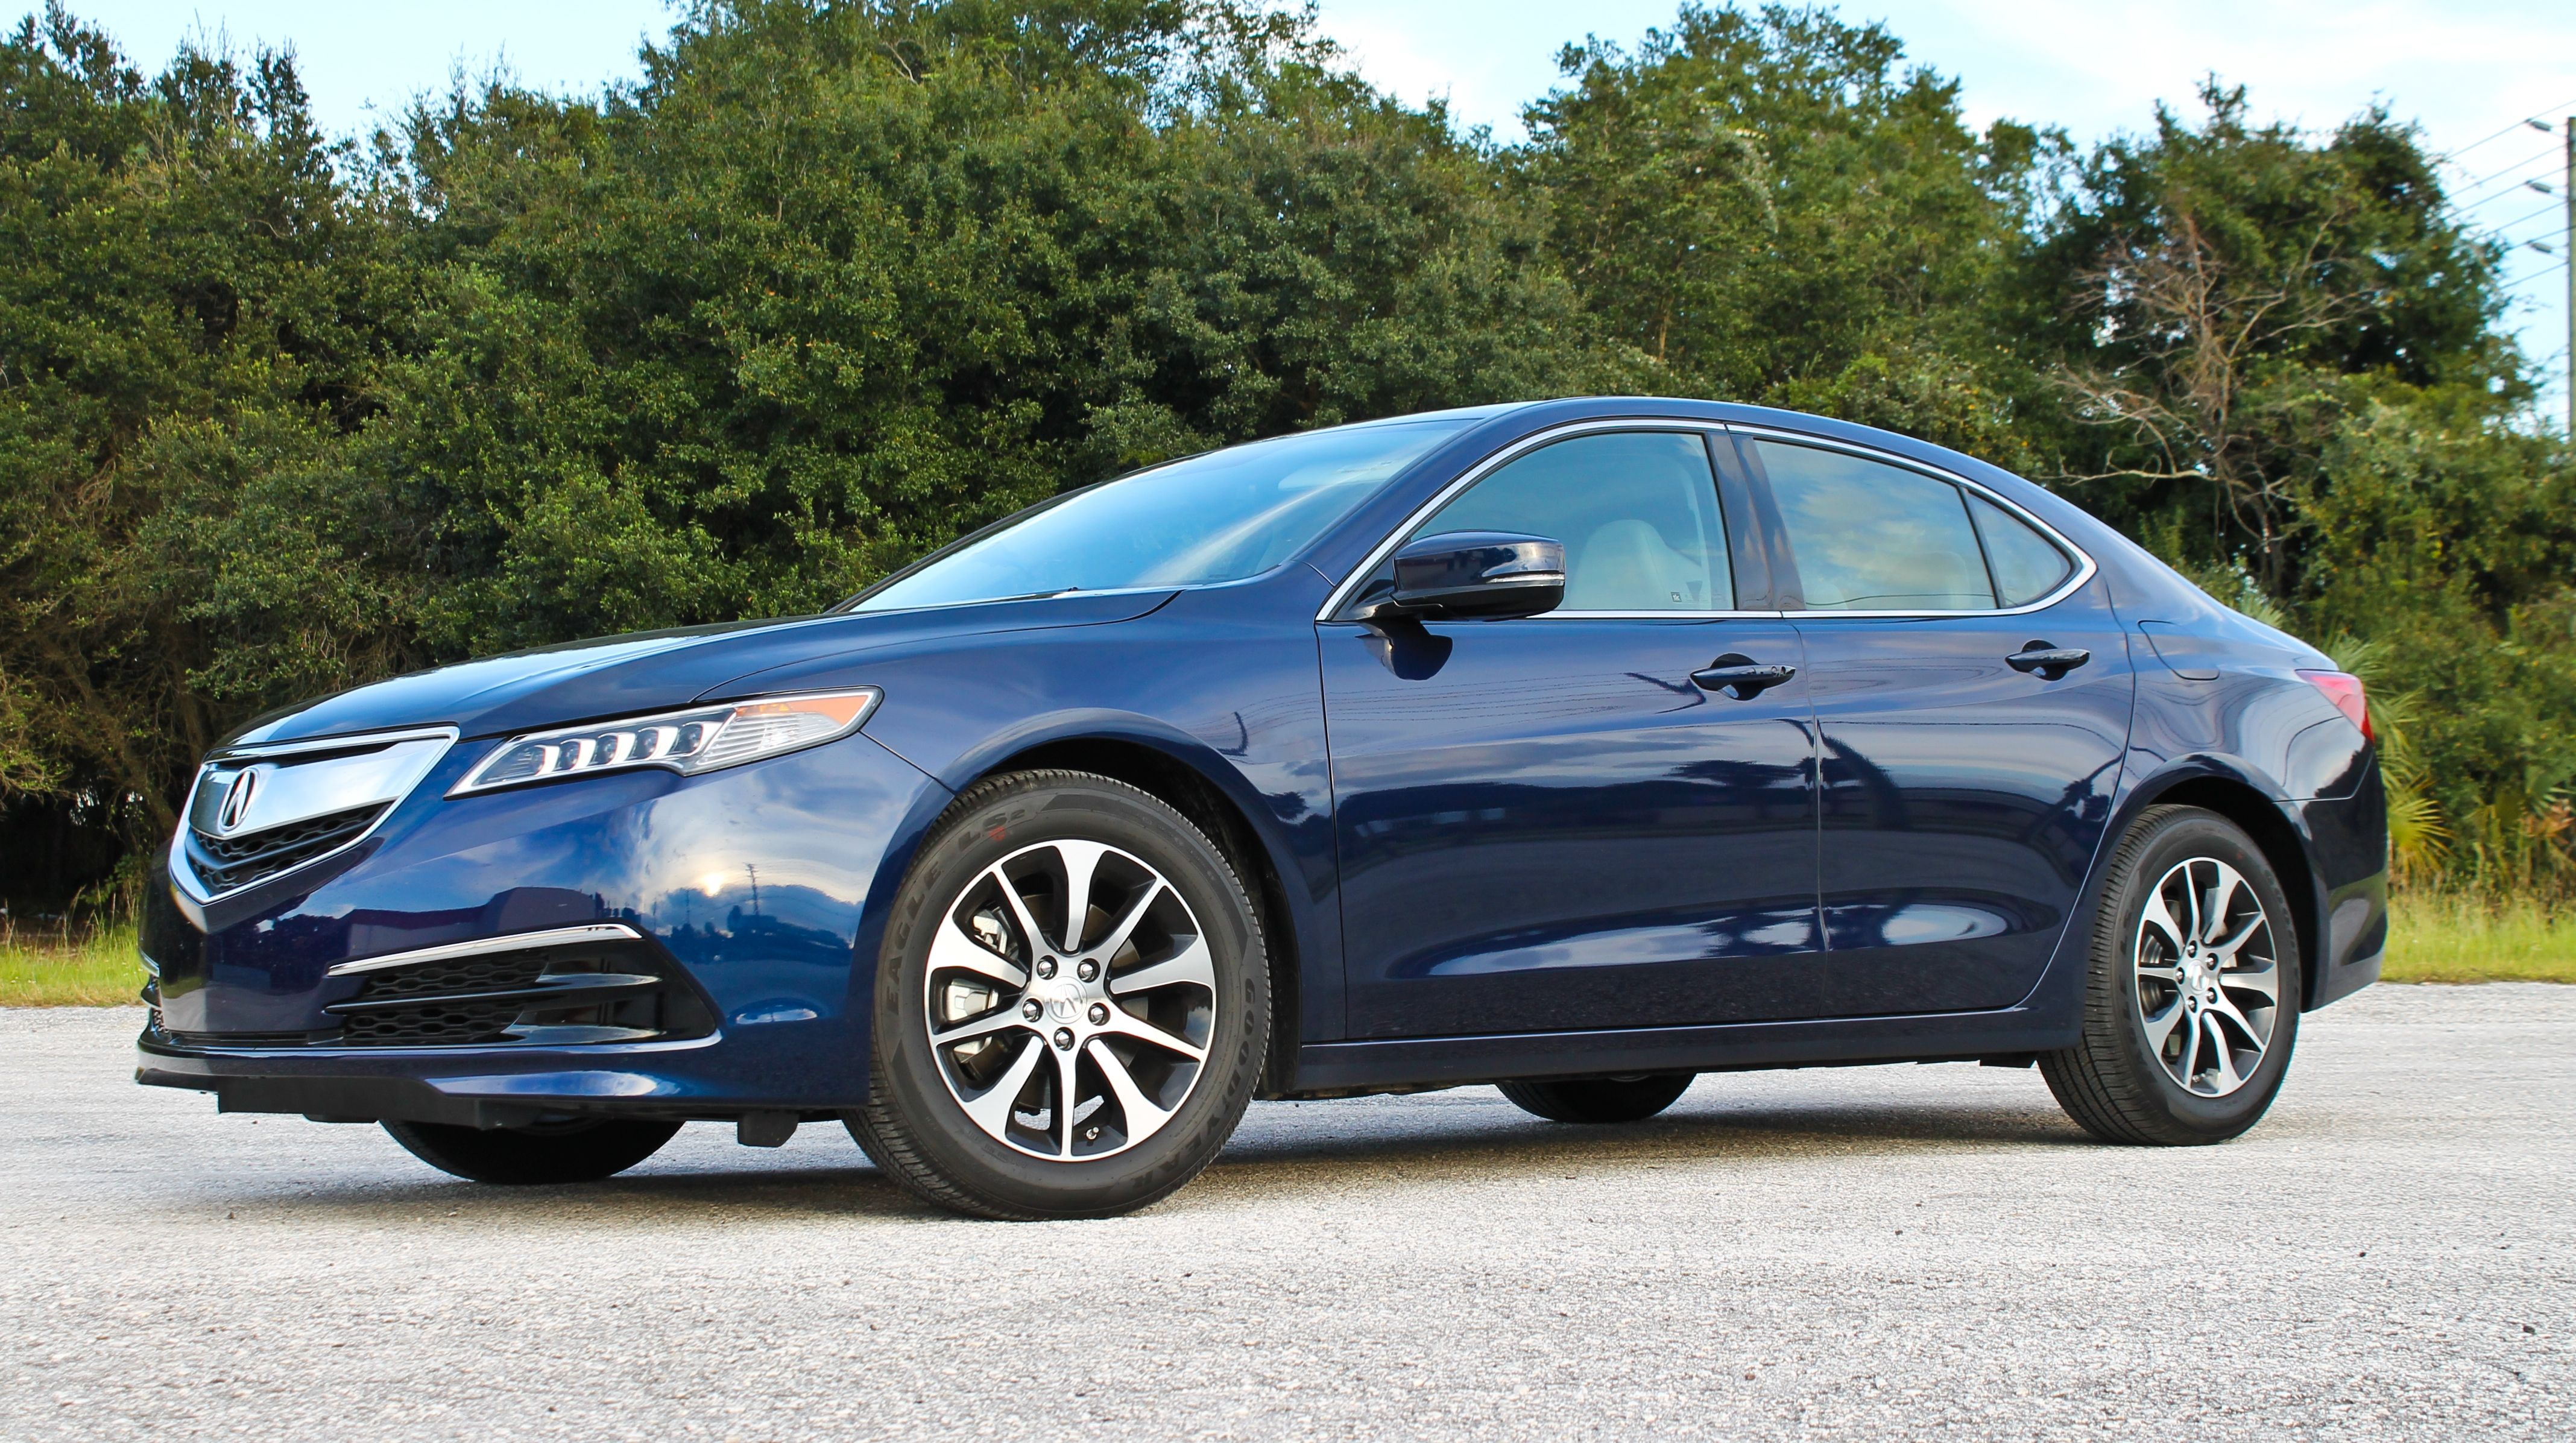  Justin Cupler drive the all-new 2015 Acura TLX 2.4L; did it impress like the ILX or leave a lot to be desired like the TL? 